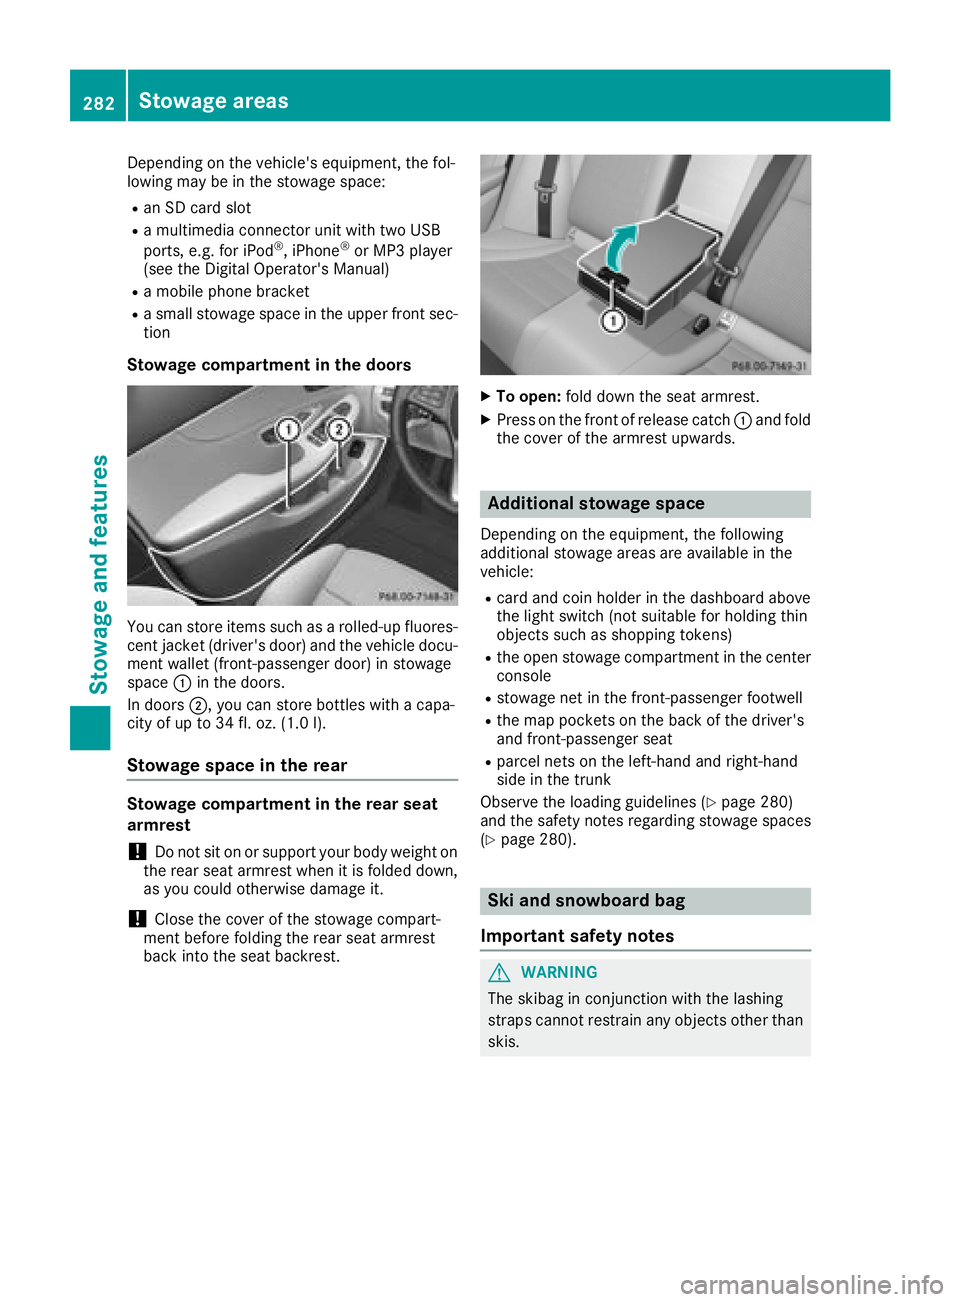 MERCEDES-BENZ C CLASS 2018  Owners Manual Depending on the vehicle's equipment, the fol-
lowing may be in the stowage space:
Ran SD card slot
Ra multimedia connector unit with two USB
ports, e.g. for iPod®, iPhone®or MP3 player
(see the